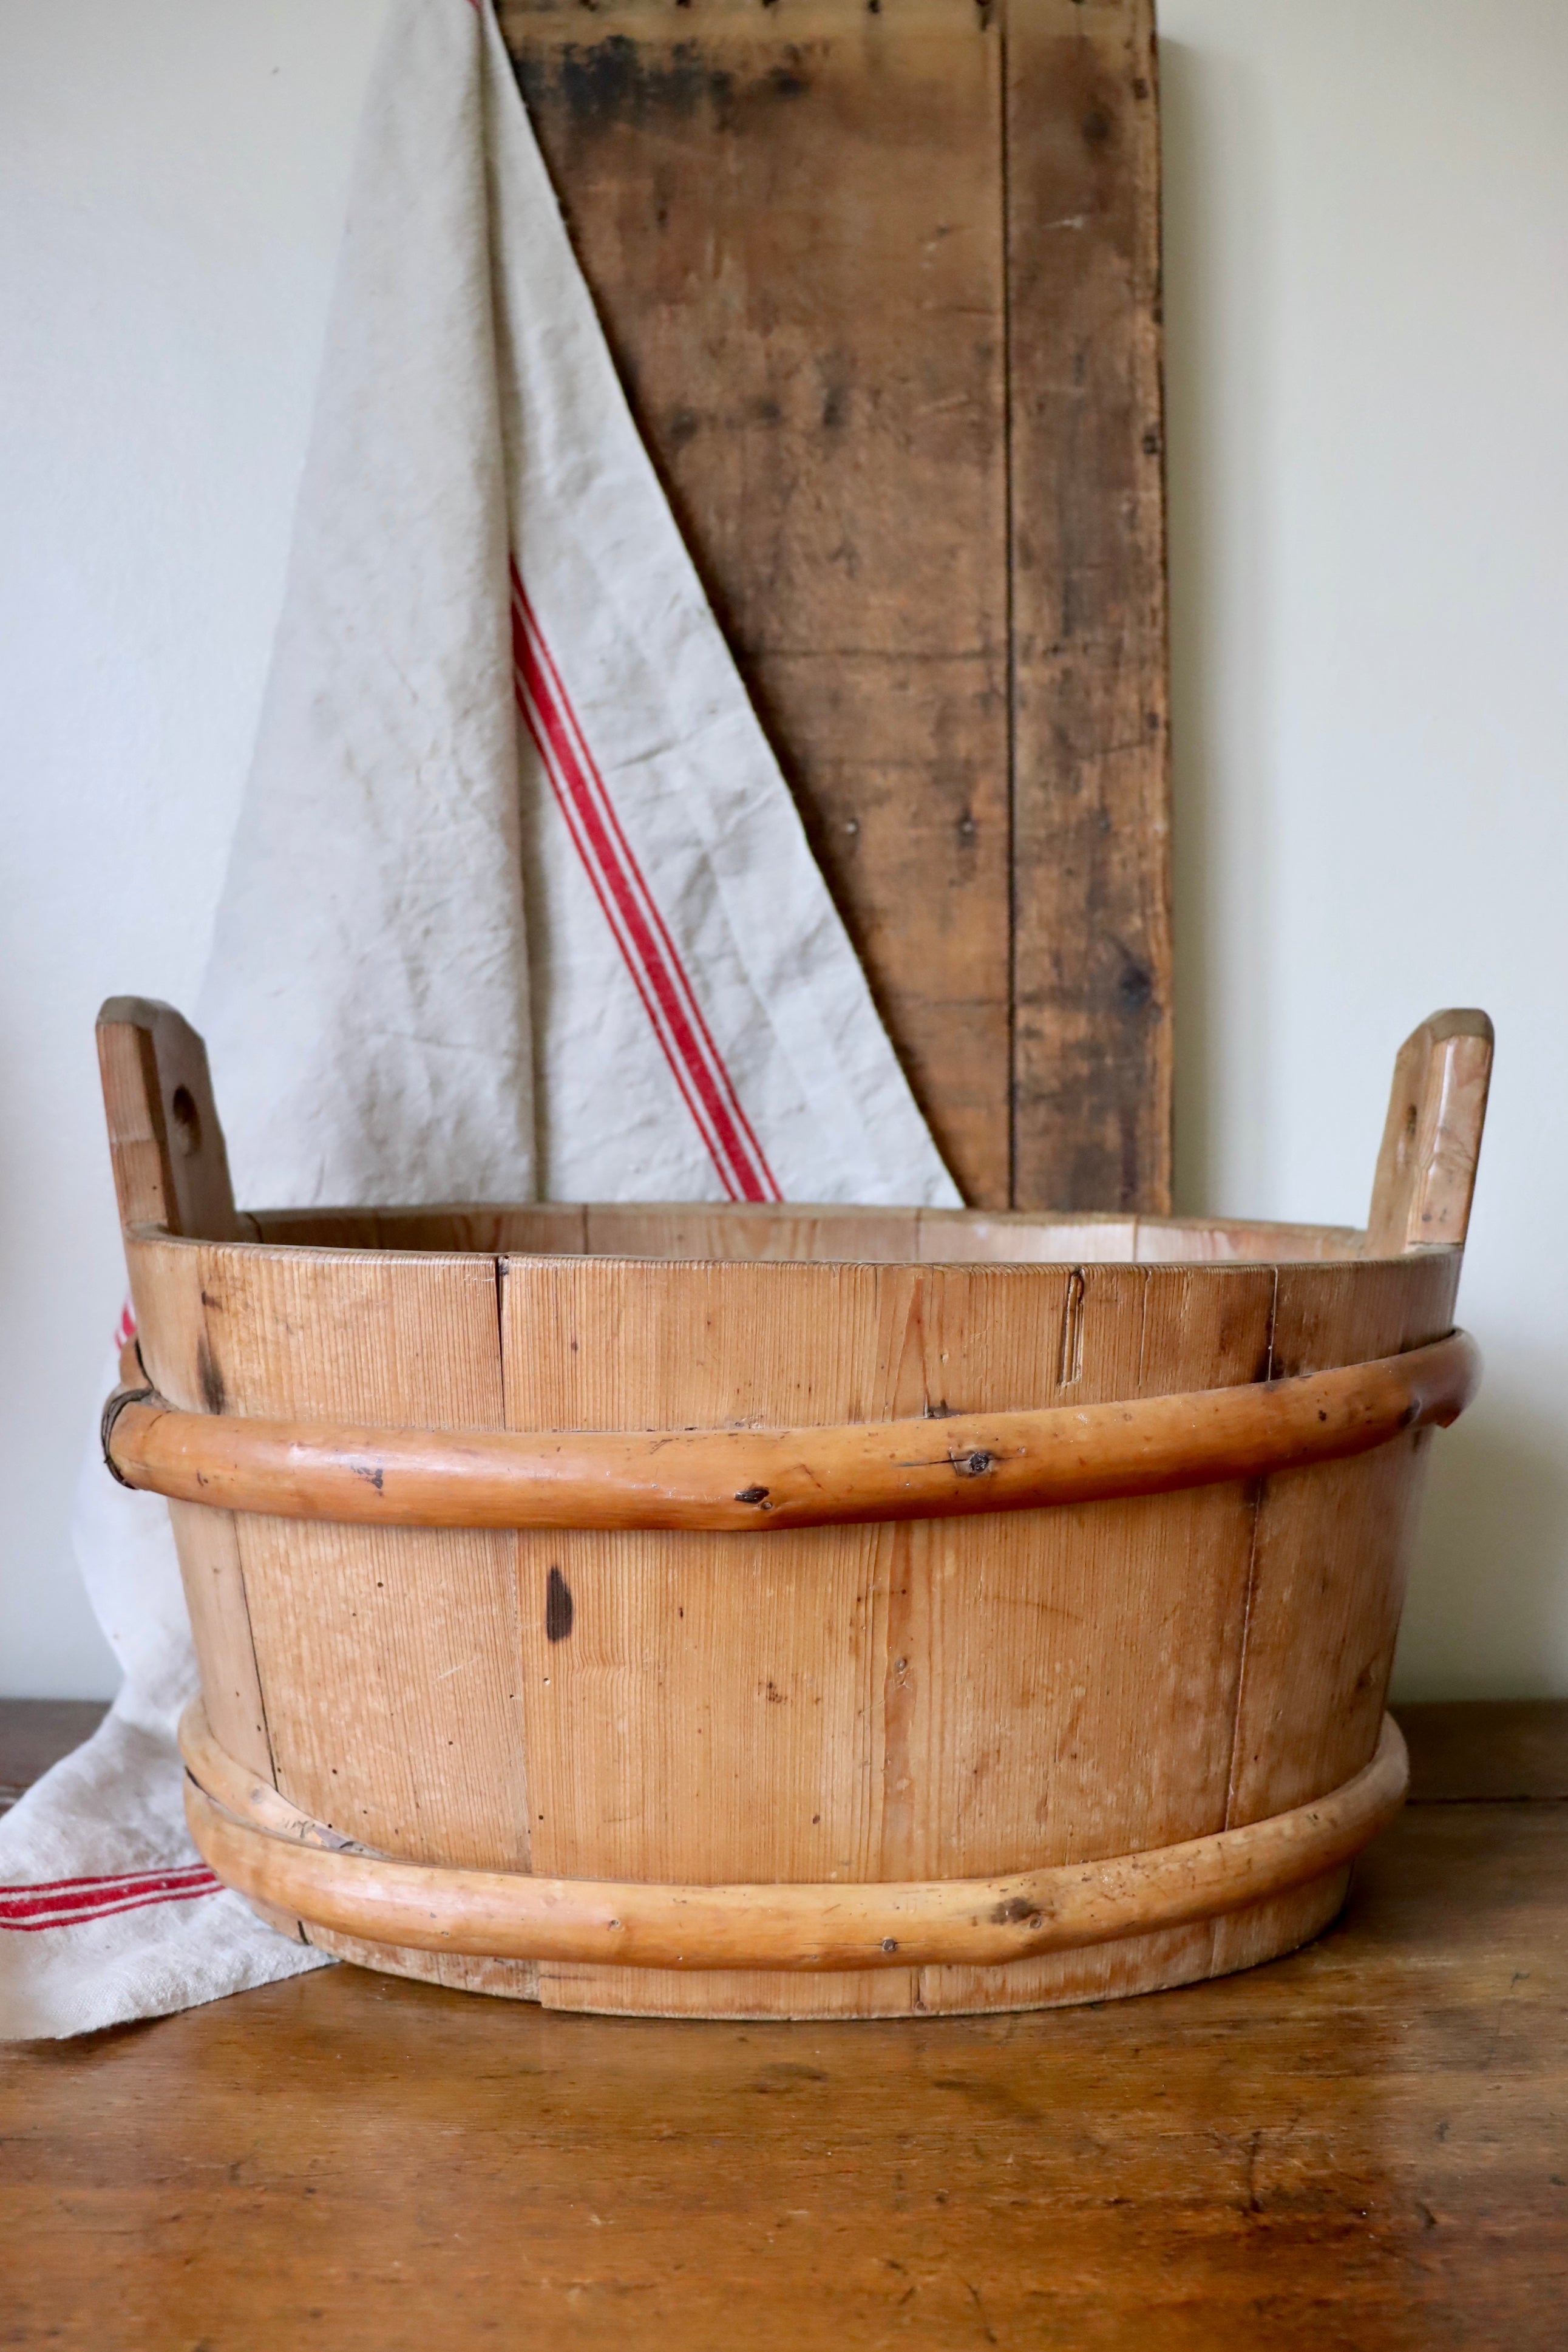 Primitive Rustic Country Wooden Pail